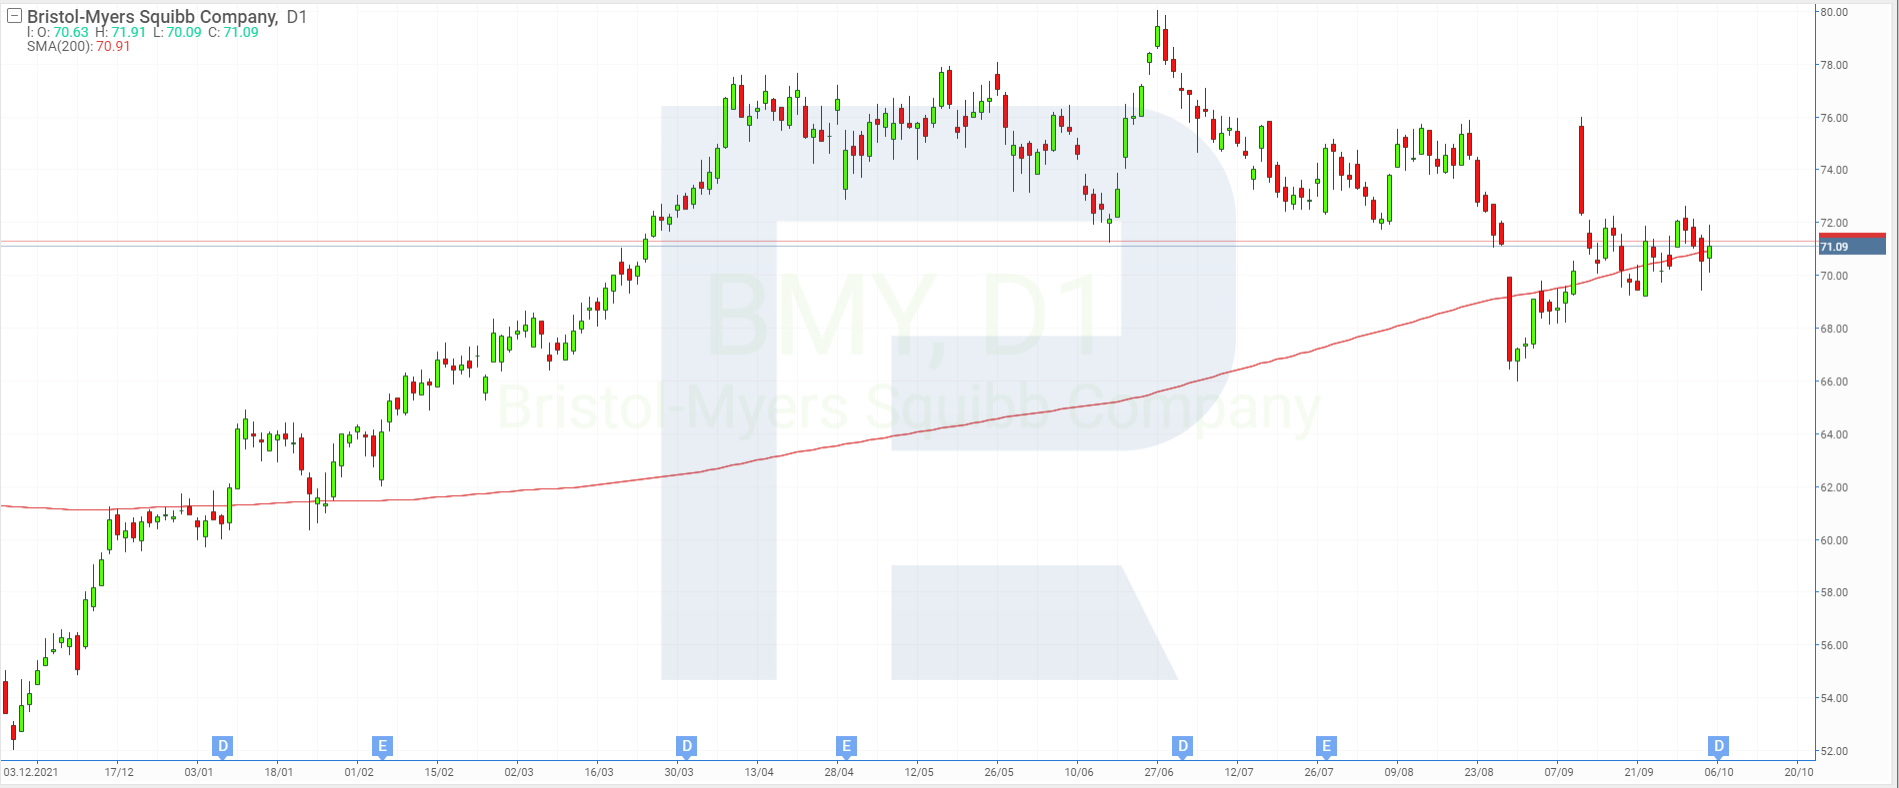 Share price chart of Bristol-Myers Squibb*